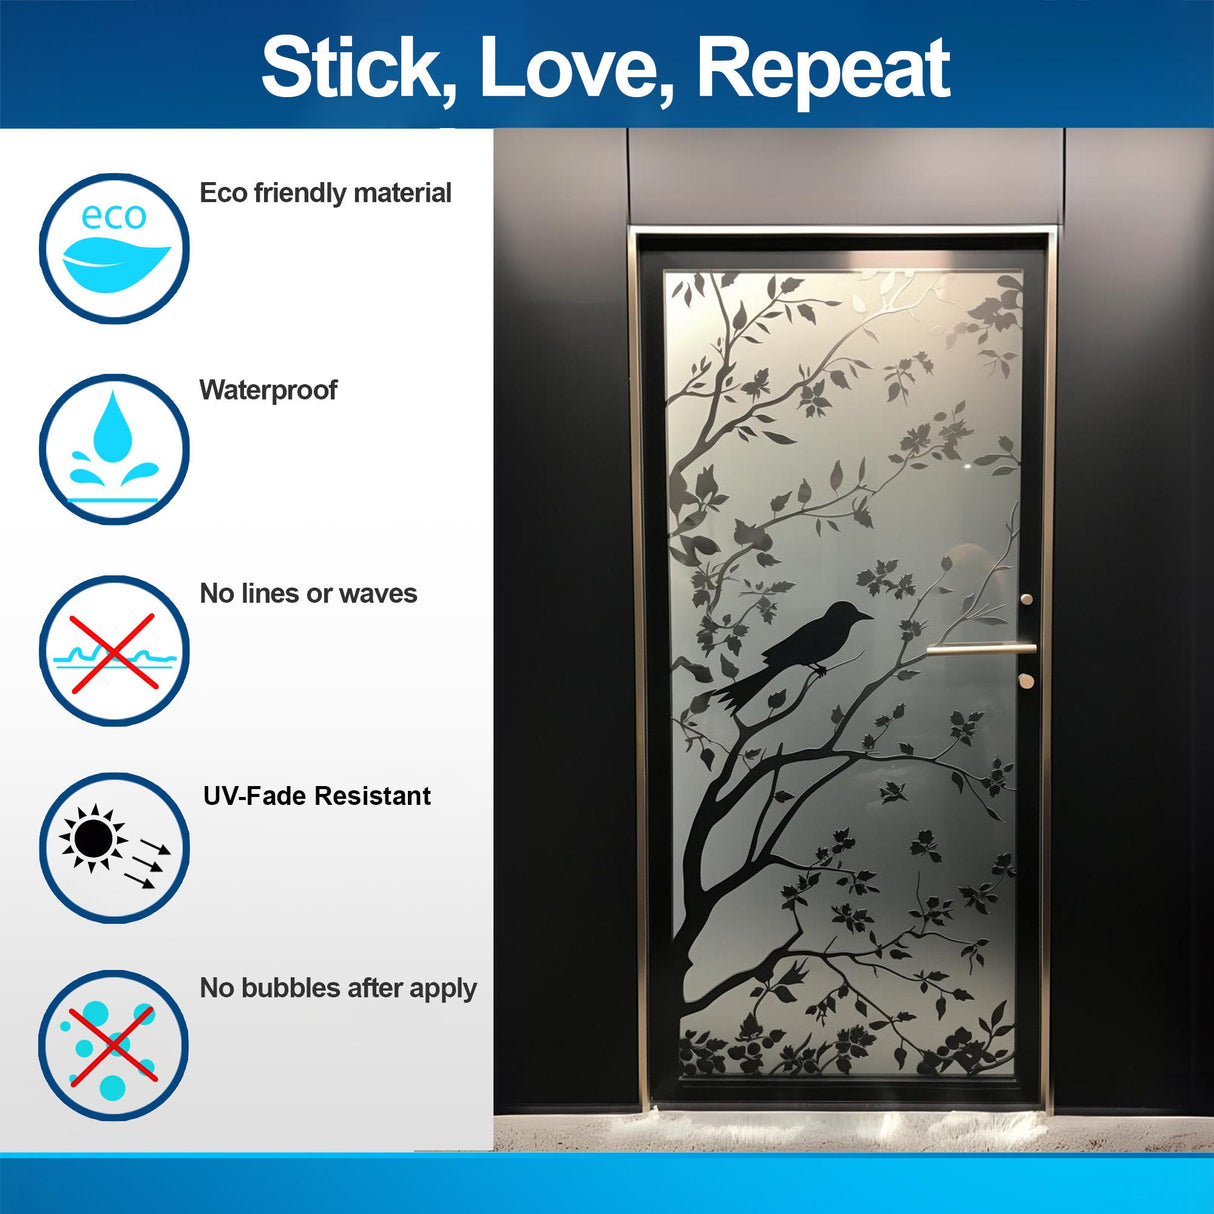 Elegant Frosted Black Tree Silhouette Decal for Glass Doors or Windows - Privacy Frosting Film with Etched Branch and Bird Sticker Design